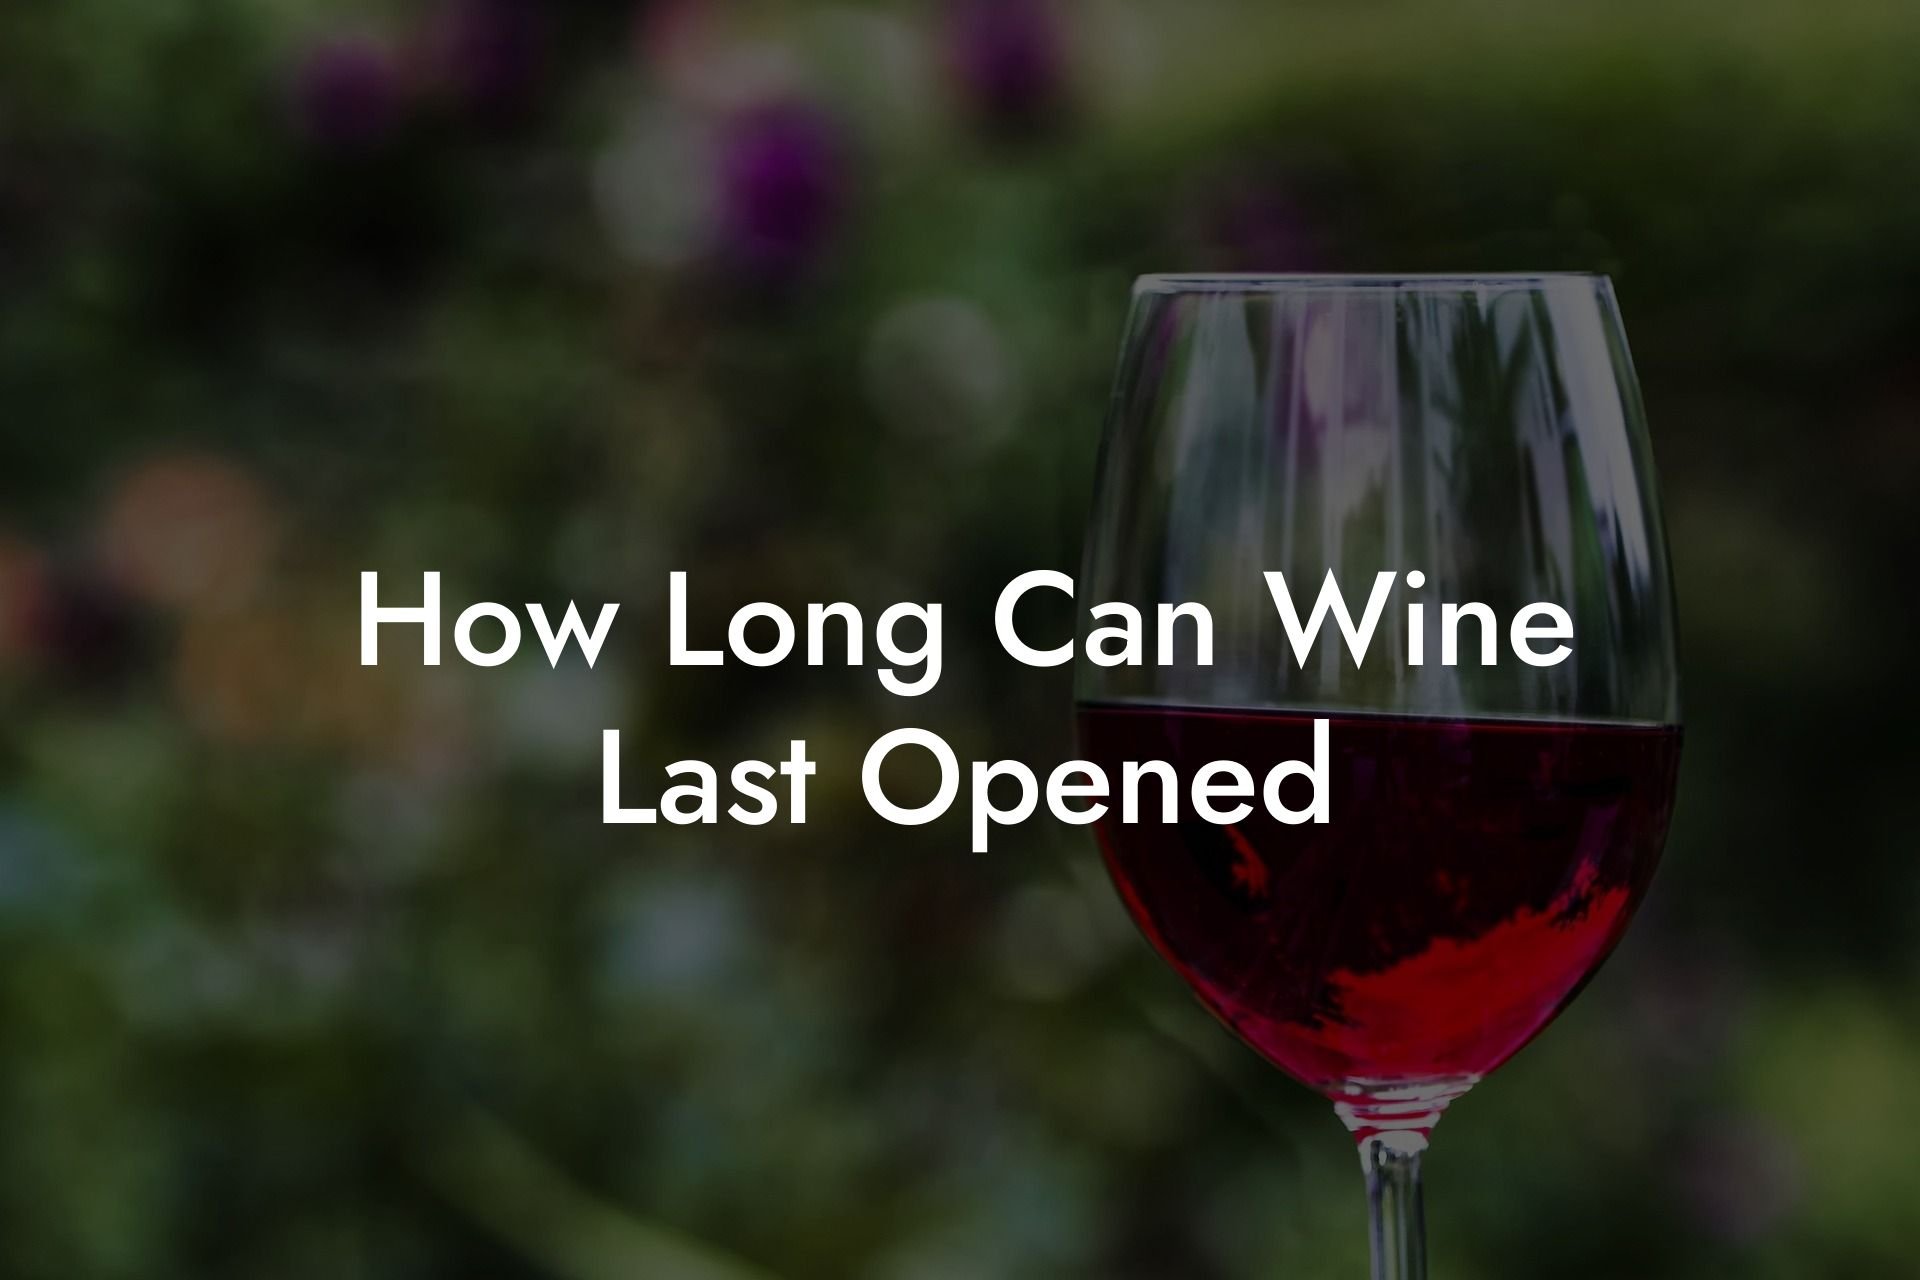 How Long Can Wine Last Opened